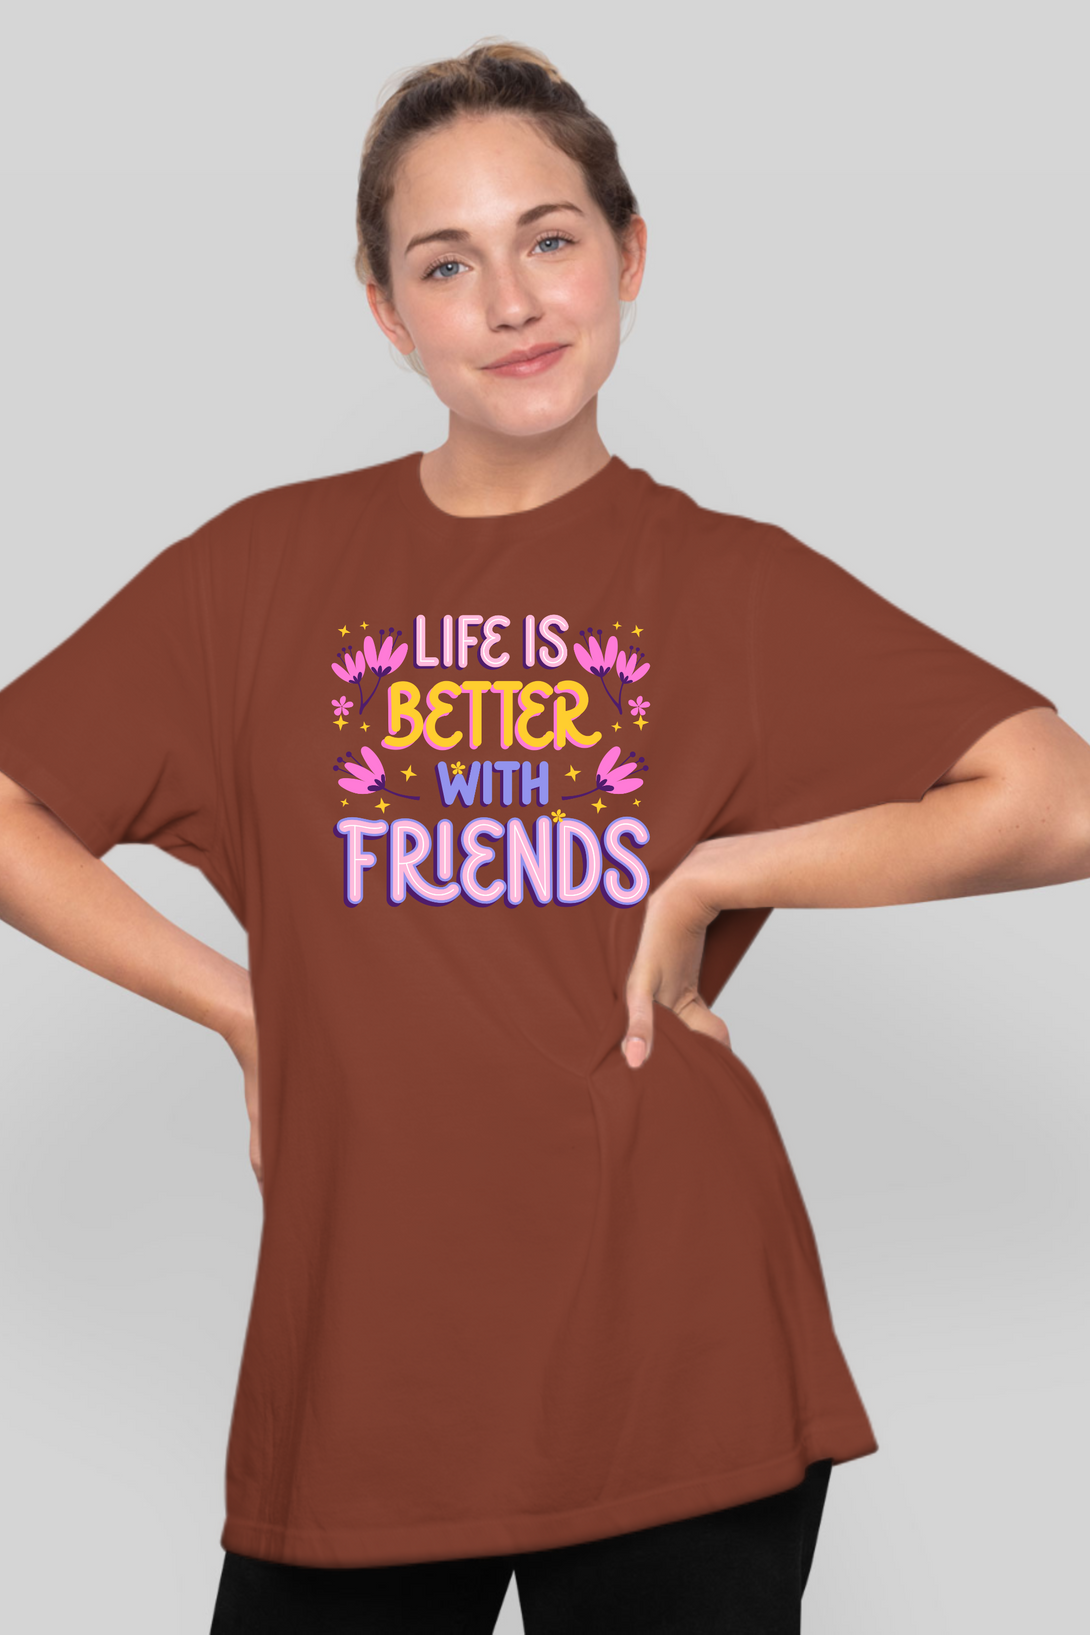 Life Is Better With Friends Printed Oversized T-Shirt For Women - WowWaves - 9